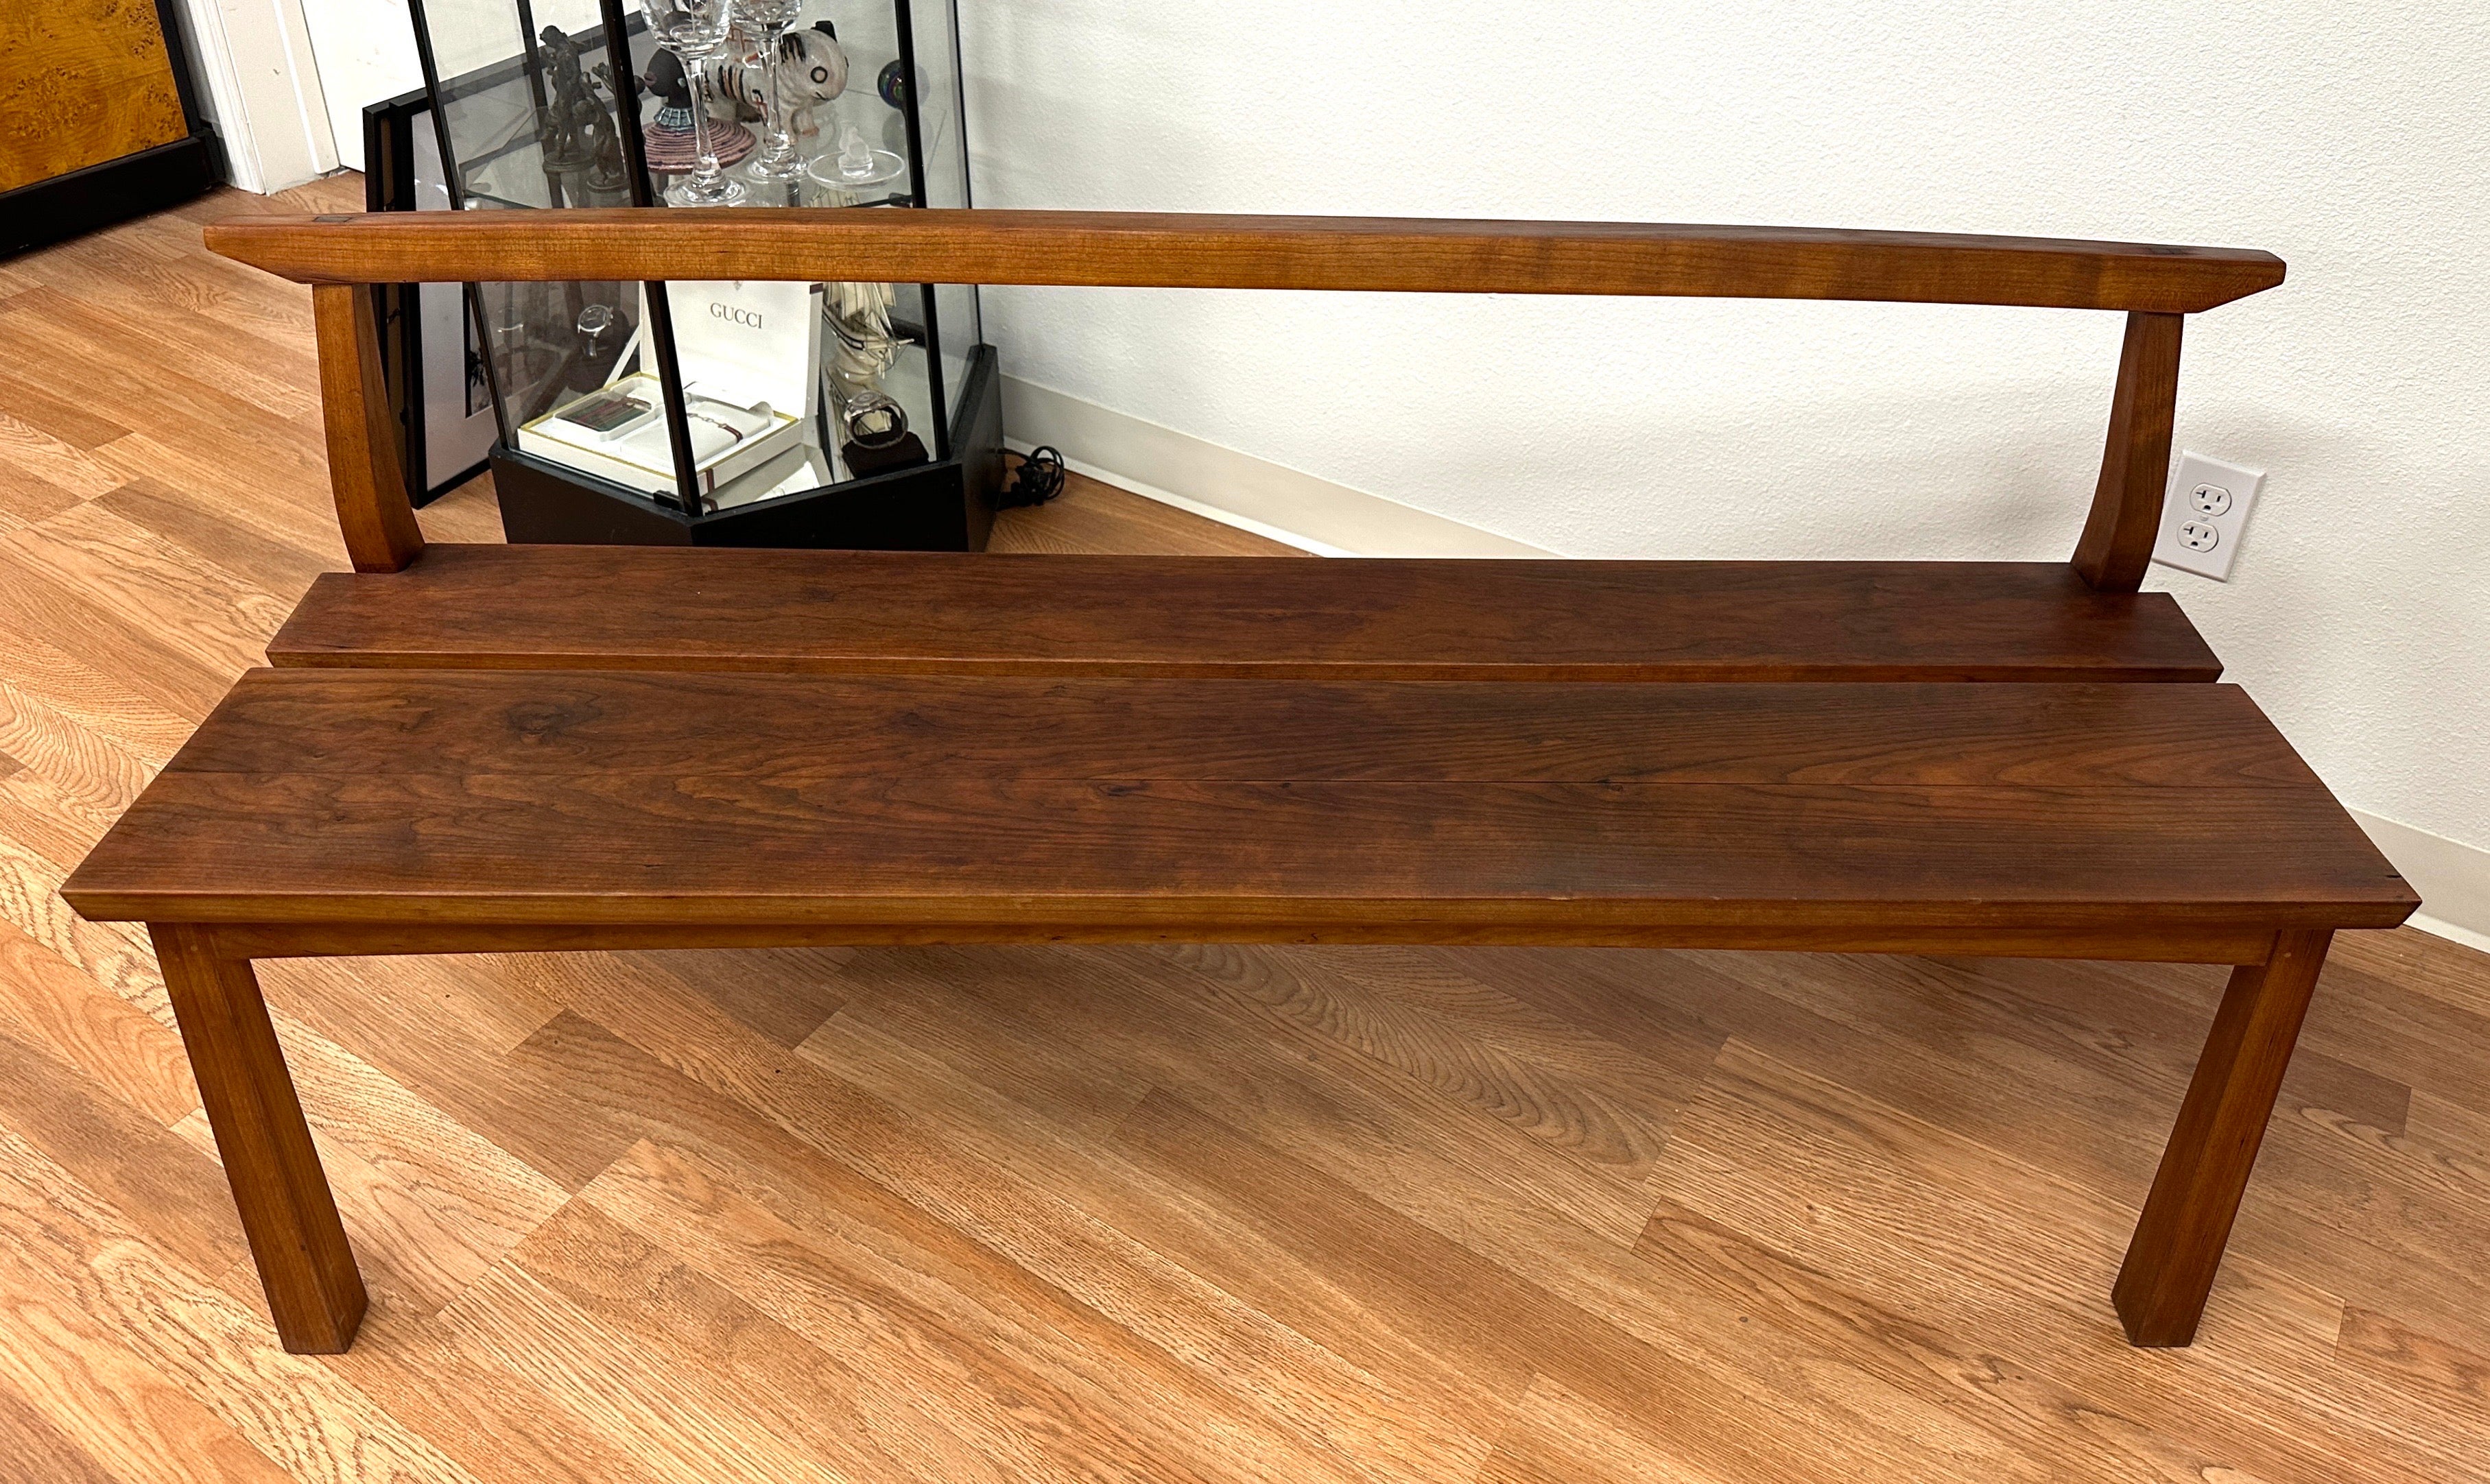 Beautiful hand made bench by Thomas Moser of Maine. I believe it's called the Edo bench. Crafted of solid cherry wood, the piece was nicely taken care of and has a lovely patina. It's been darkened by some use on the seat. In good condition with